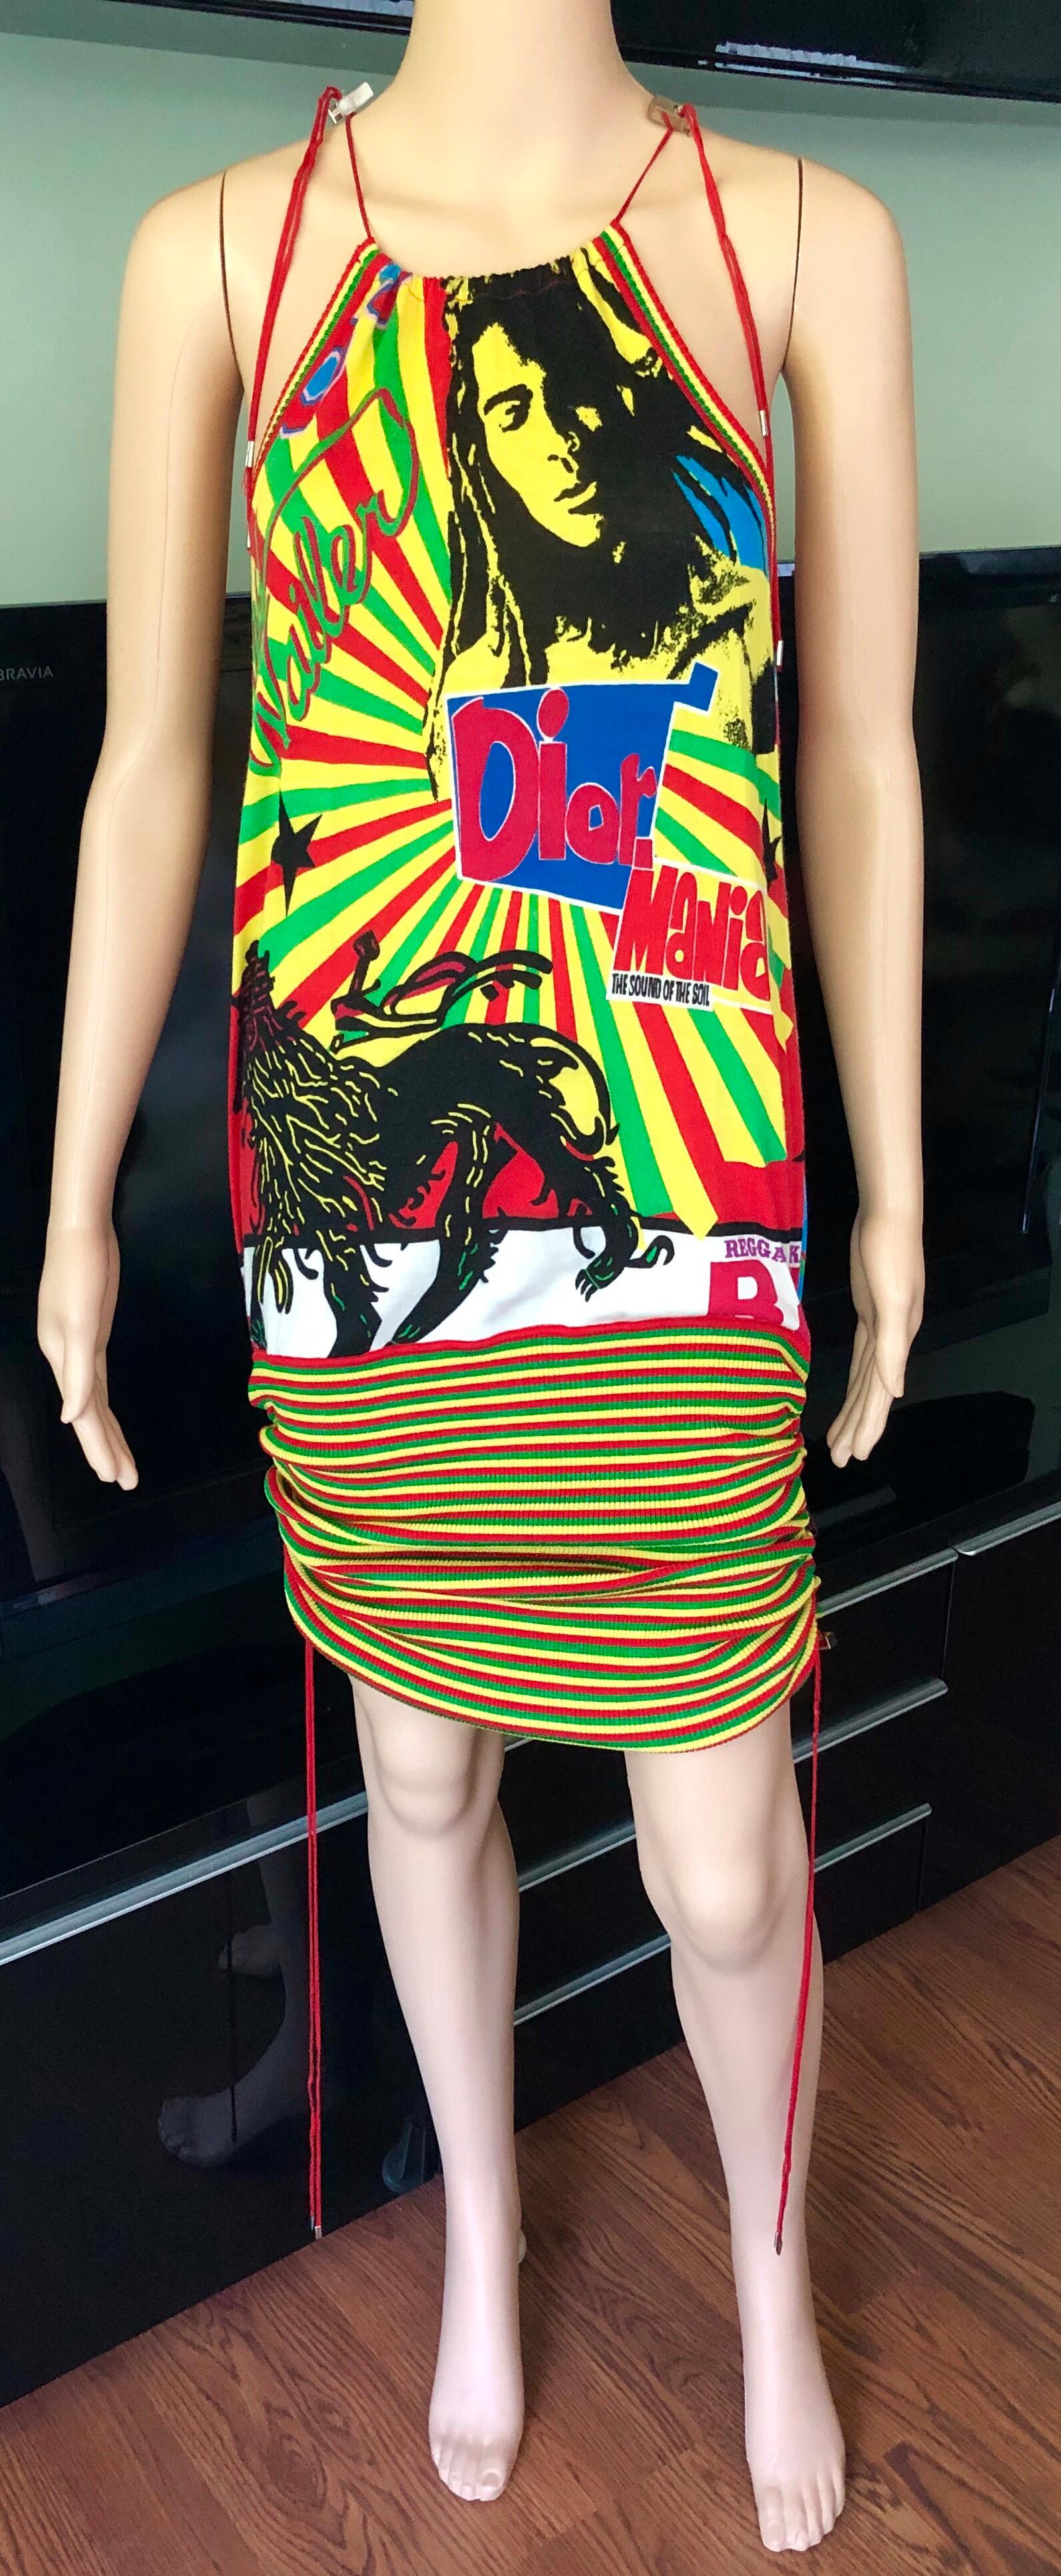 Christian Dior by John Galliano S/S 2004 Vintage Rasta Halter Knit Dress

Christian Dior vintage knit dress with abstract print throughout and tie closure at nape. 